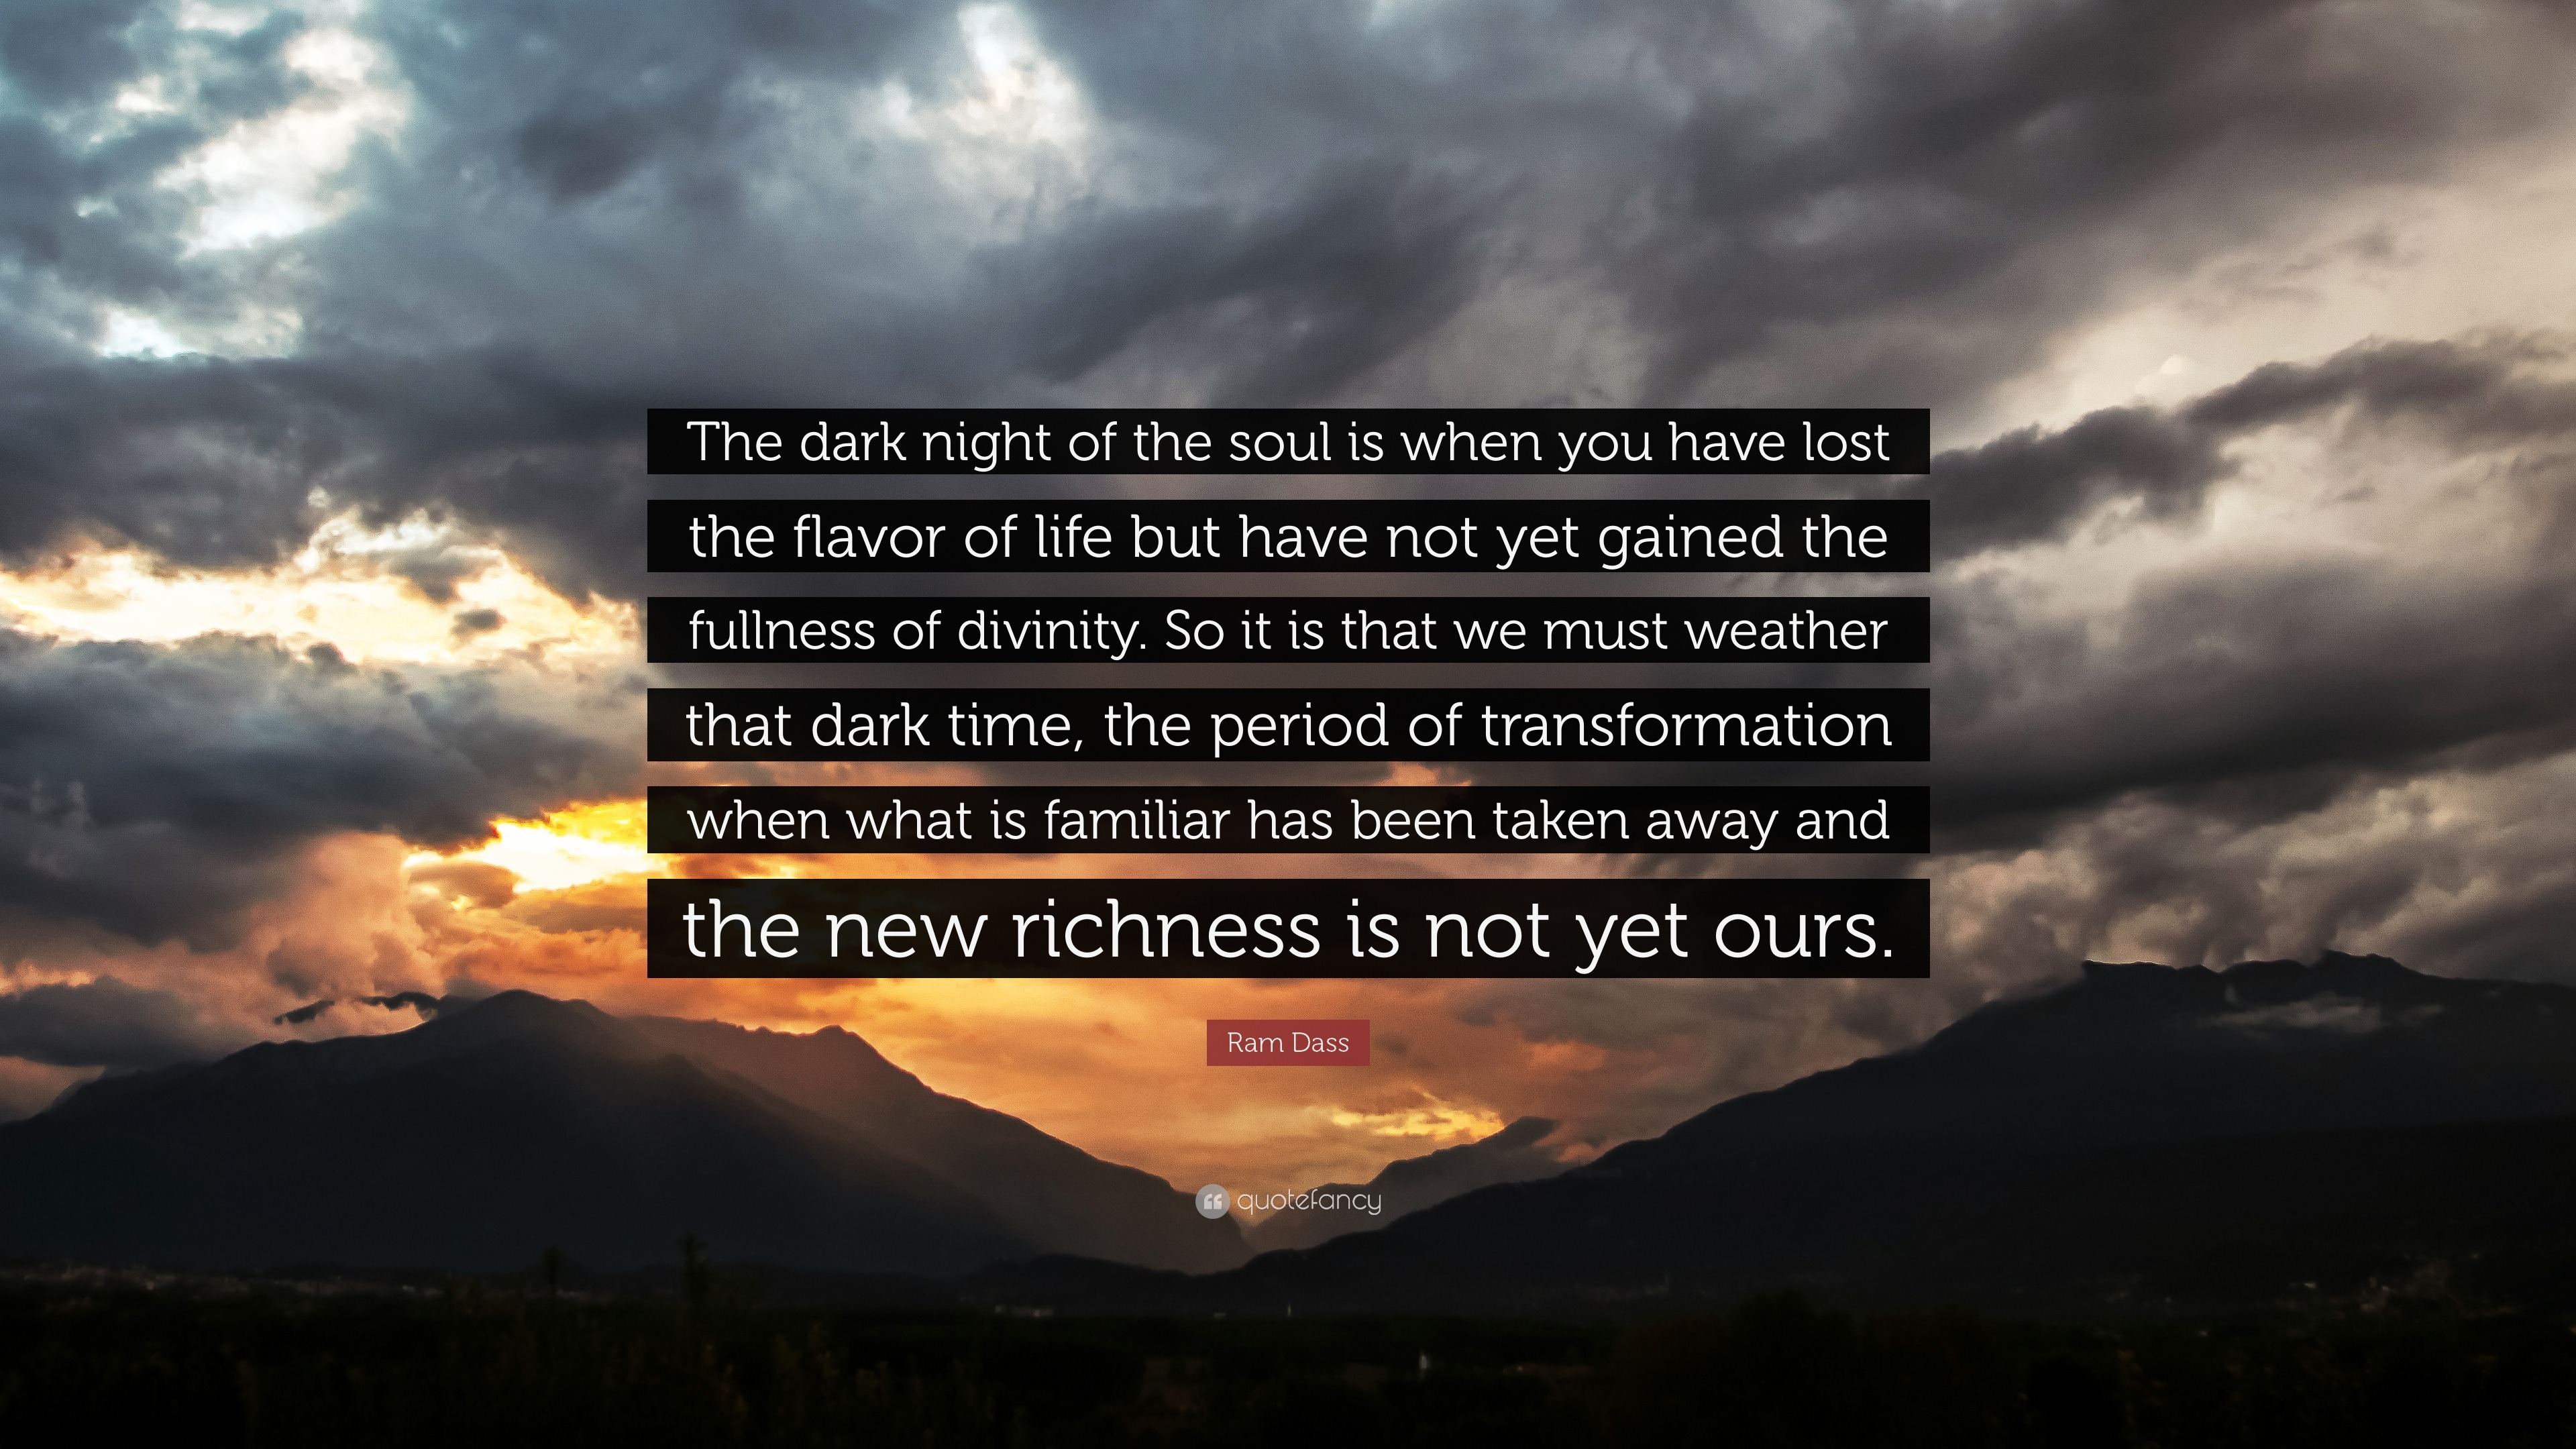 Ram Dass Quote: “The dark night of the soul is when you have lost the